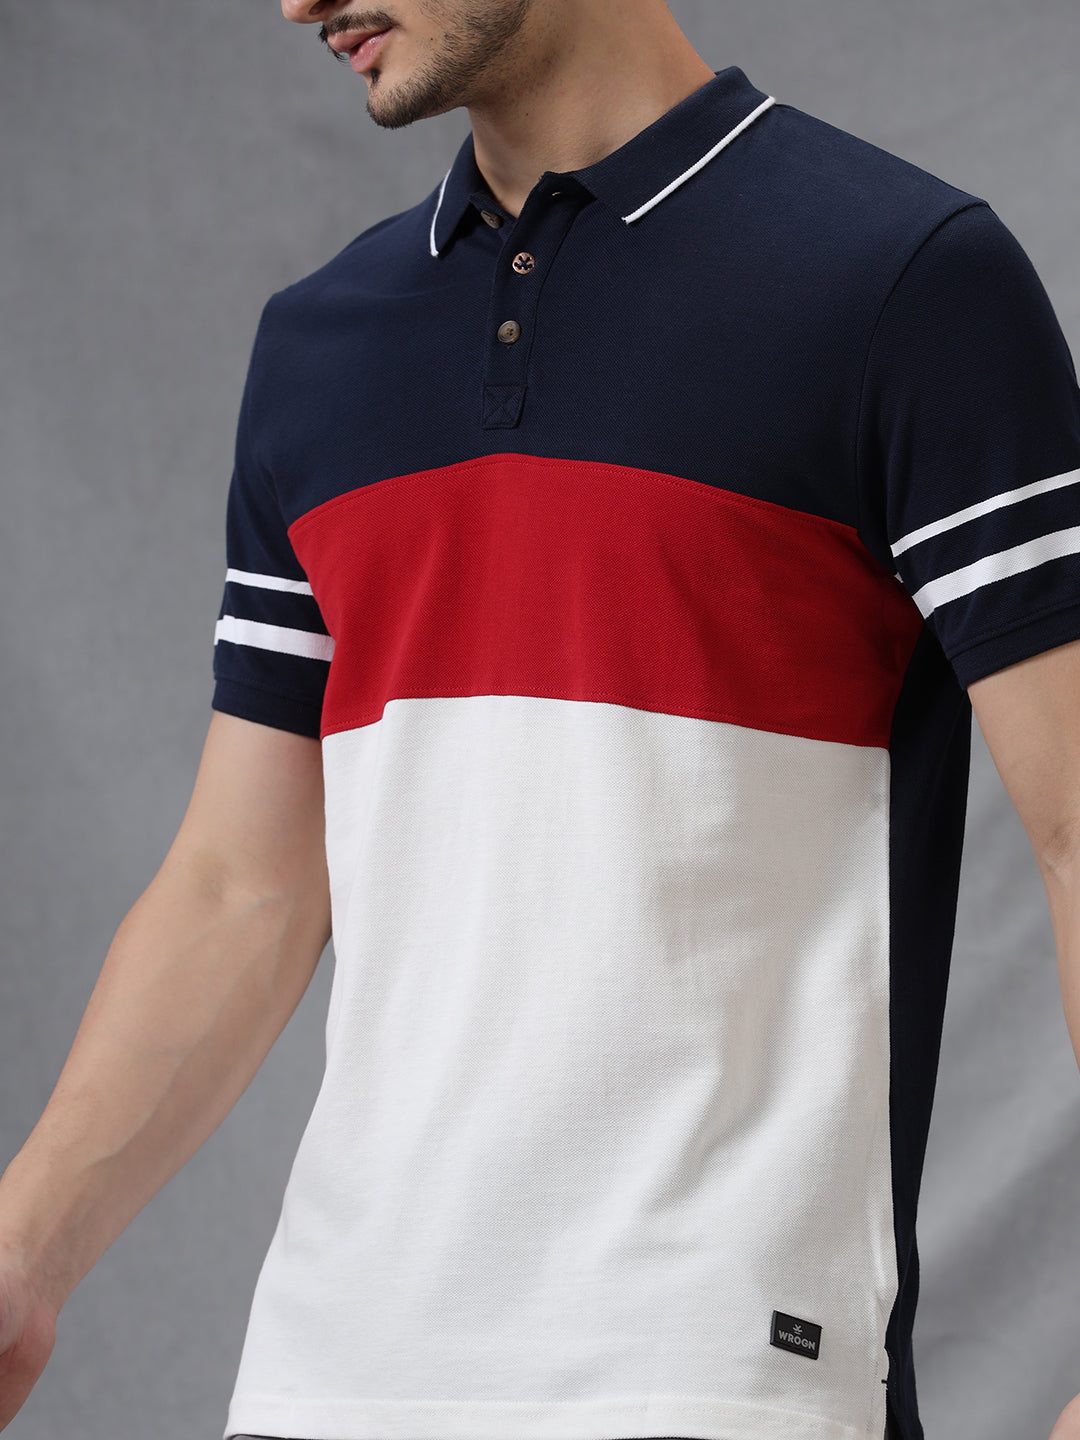 Colorblocked Cut & Sew Polo T-Shirt